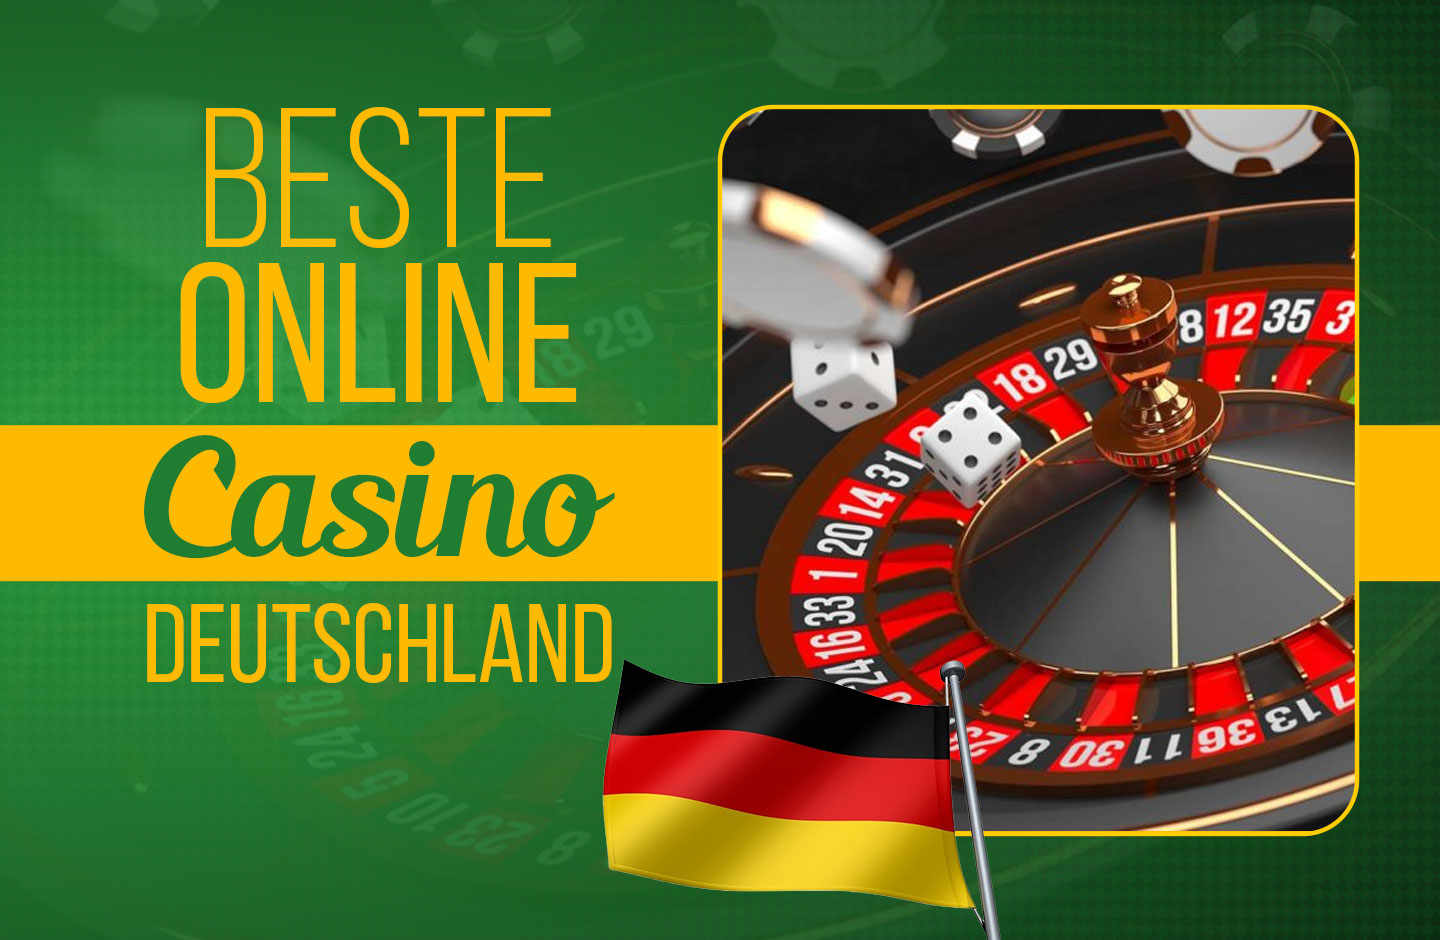 Picture Your Casino Österreich On Top. Read This And Make It So